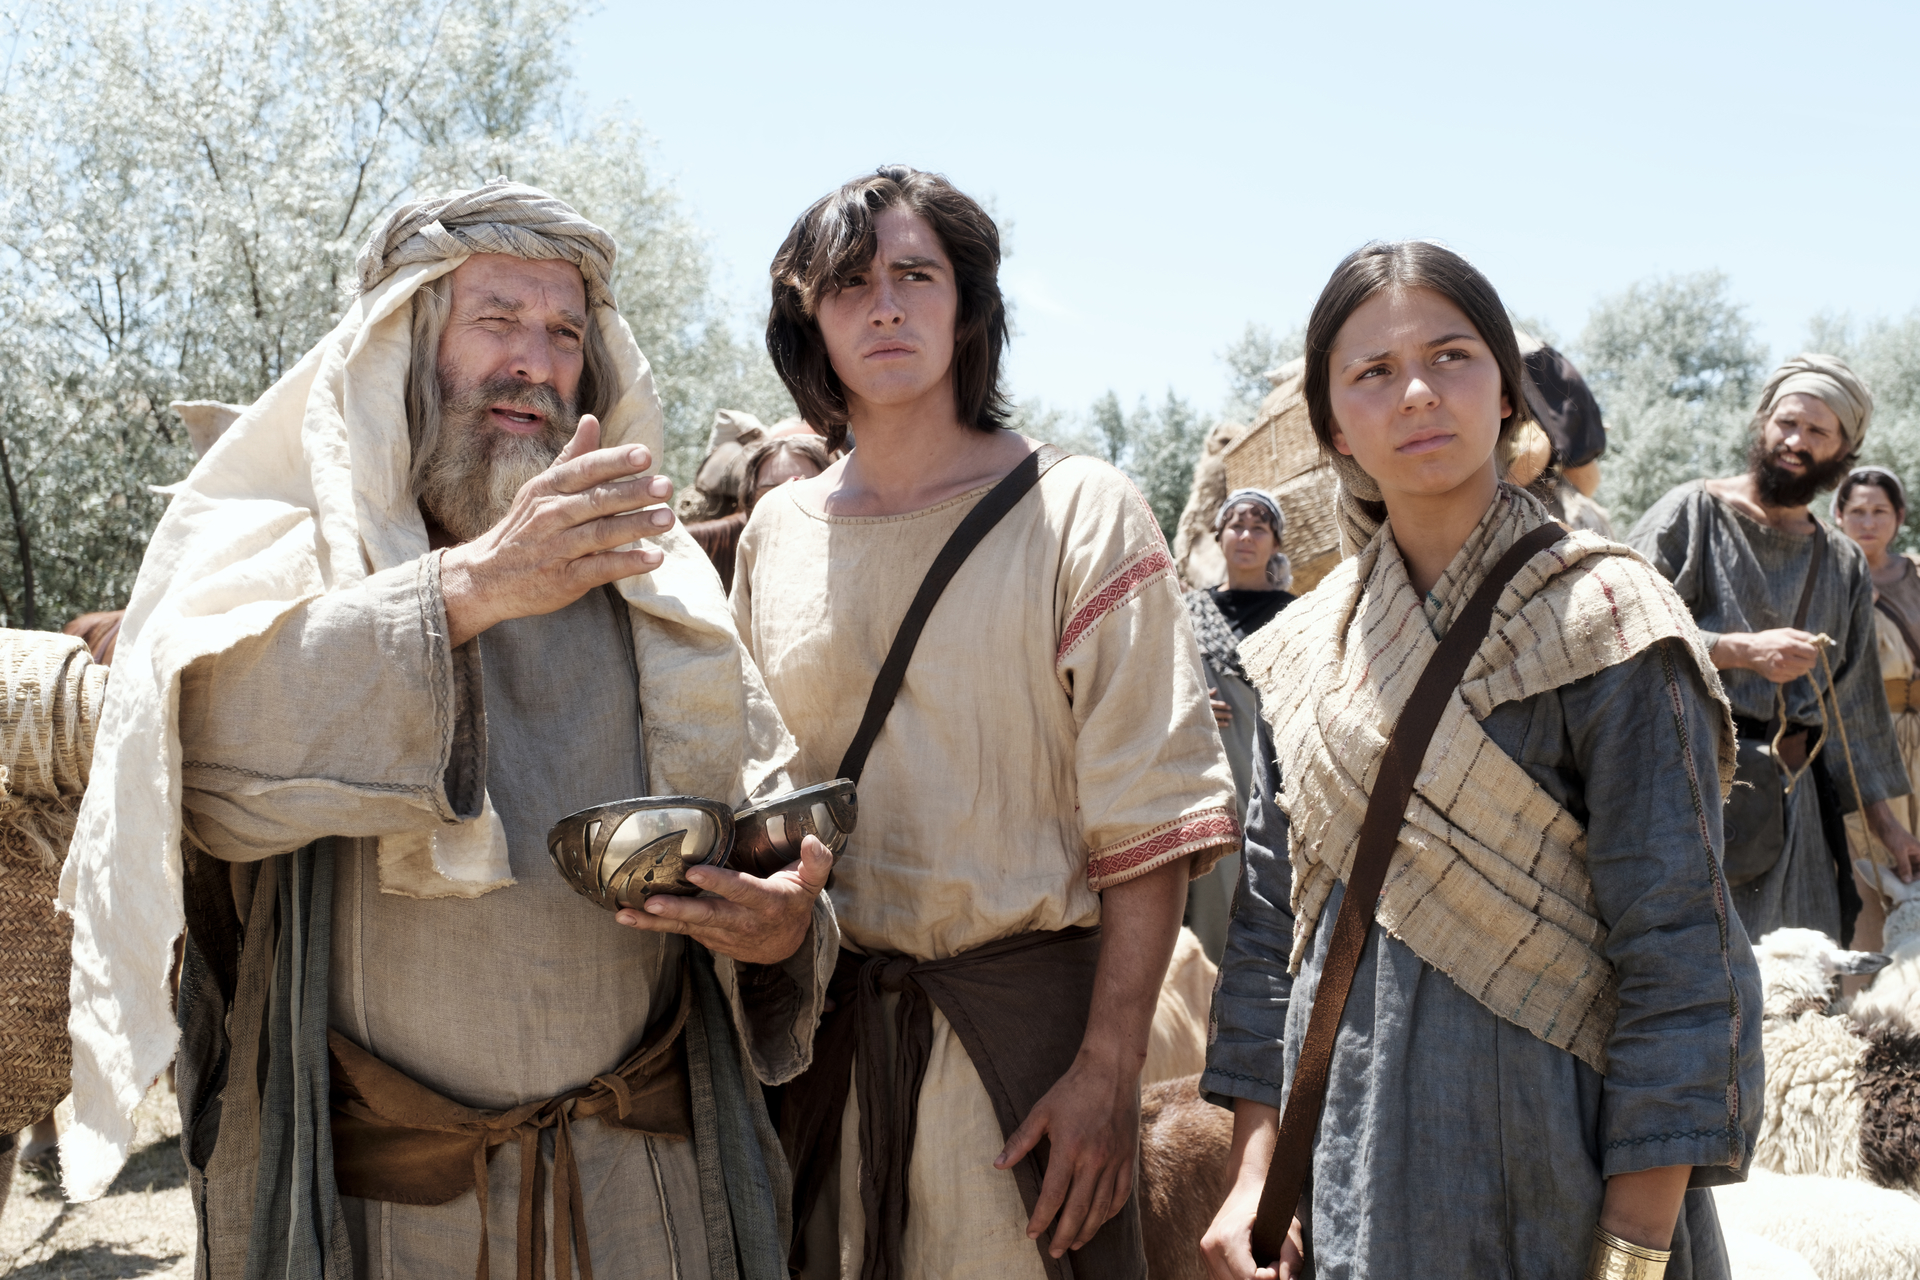 Lehi, Nephi, and Nephi's wife using the Liahona